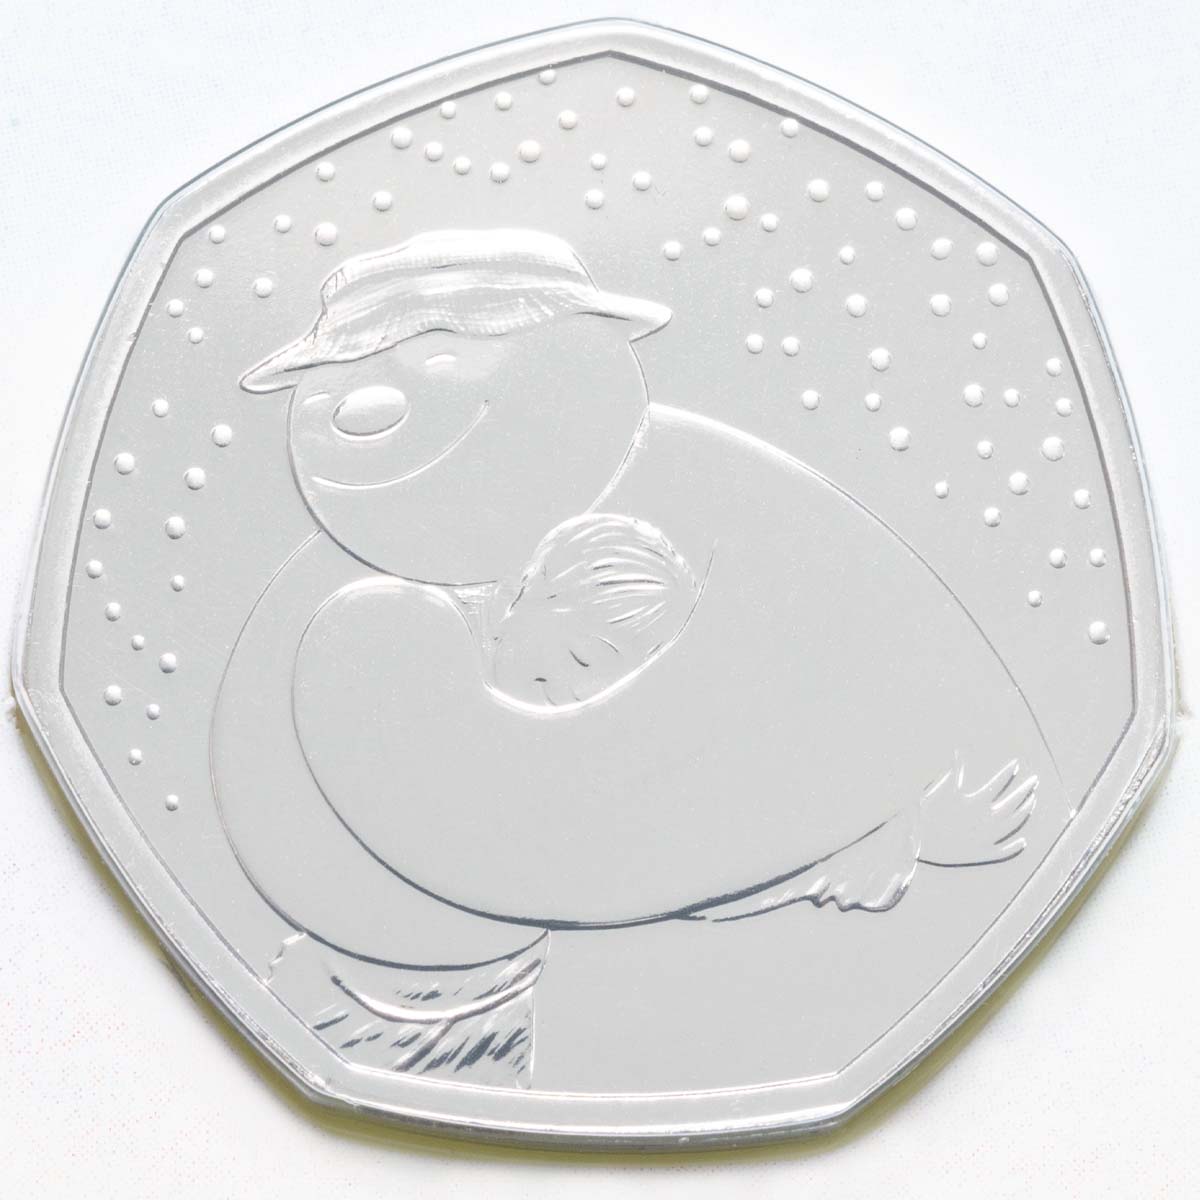 Uk20SMBU 2020 The Snowman Fifty Pence Brilliant Uncirculated Coin In Folder Reverse